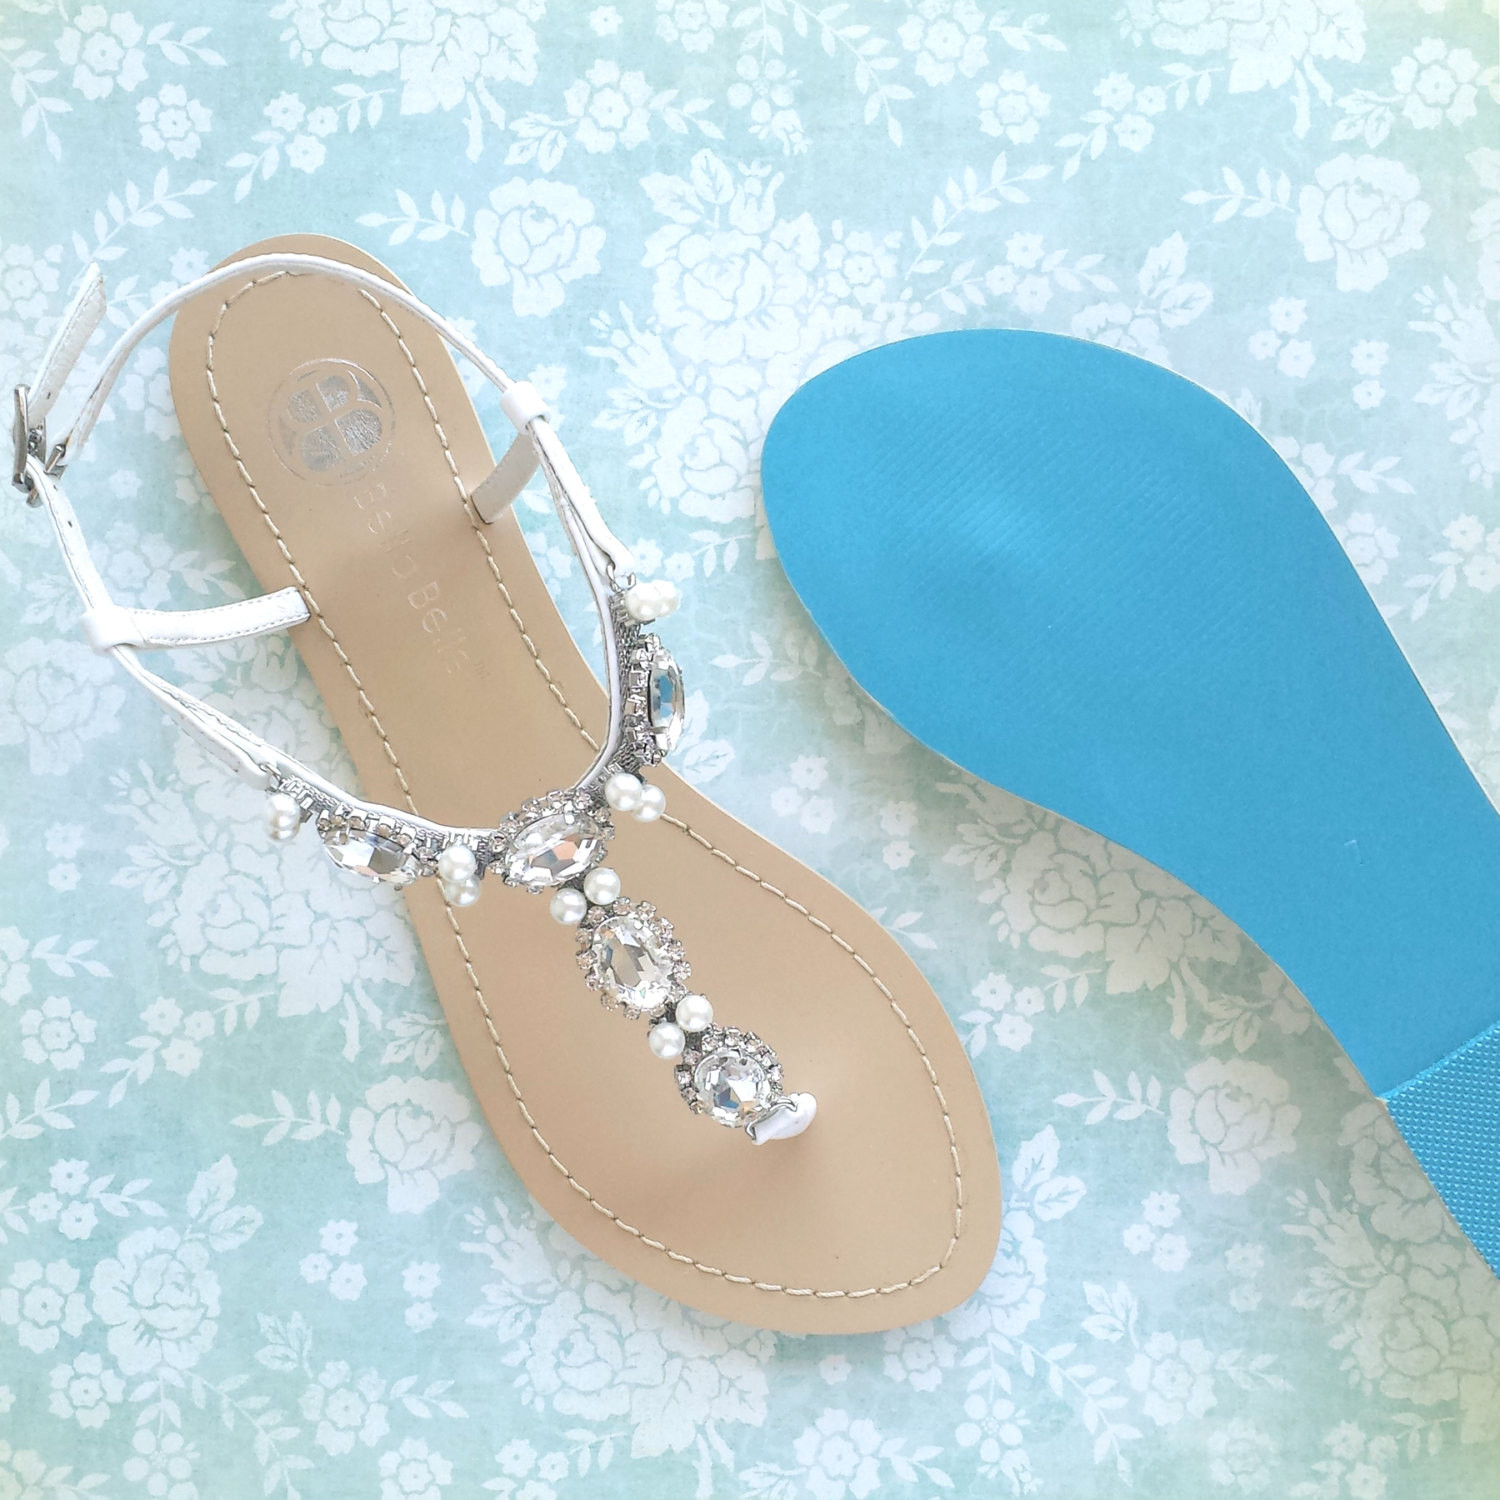 Beach Wedding Sandals For Bride
 Wedding Sandals Shoes for Beach or Destination by